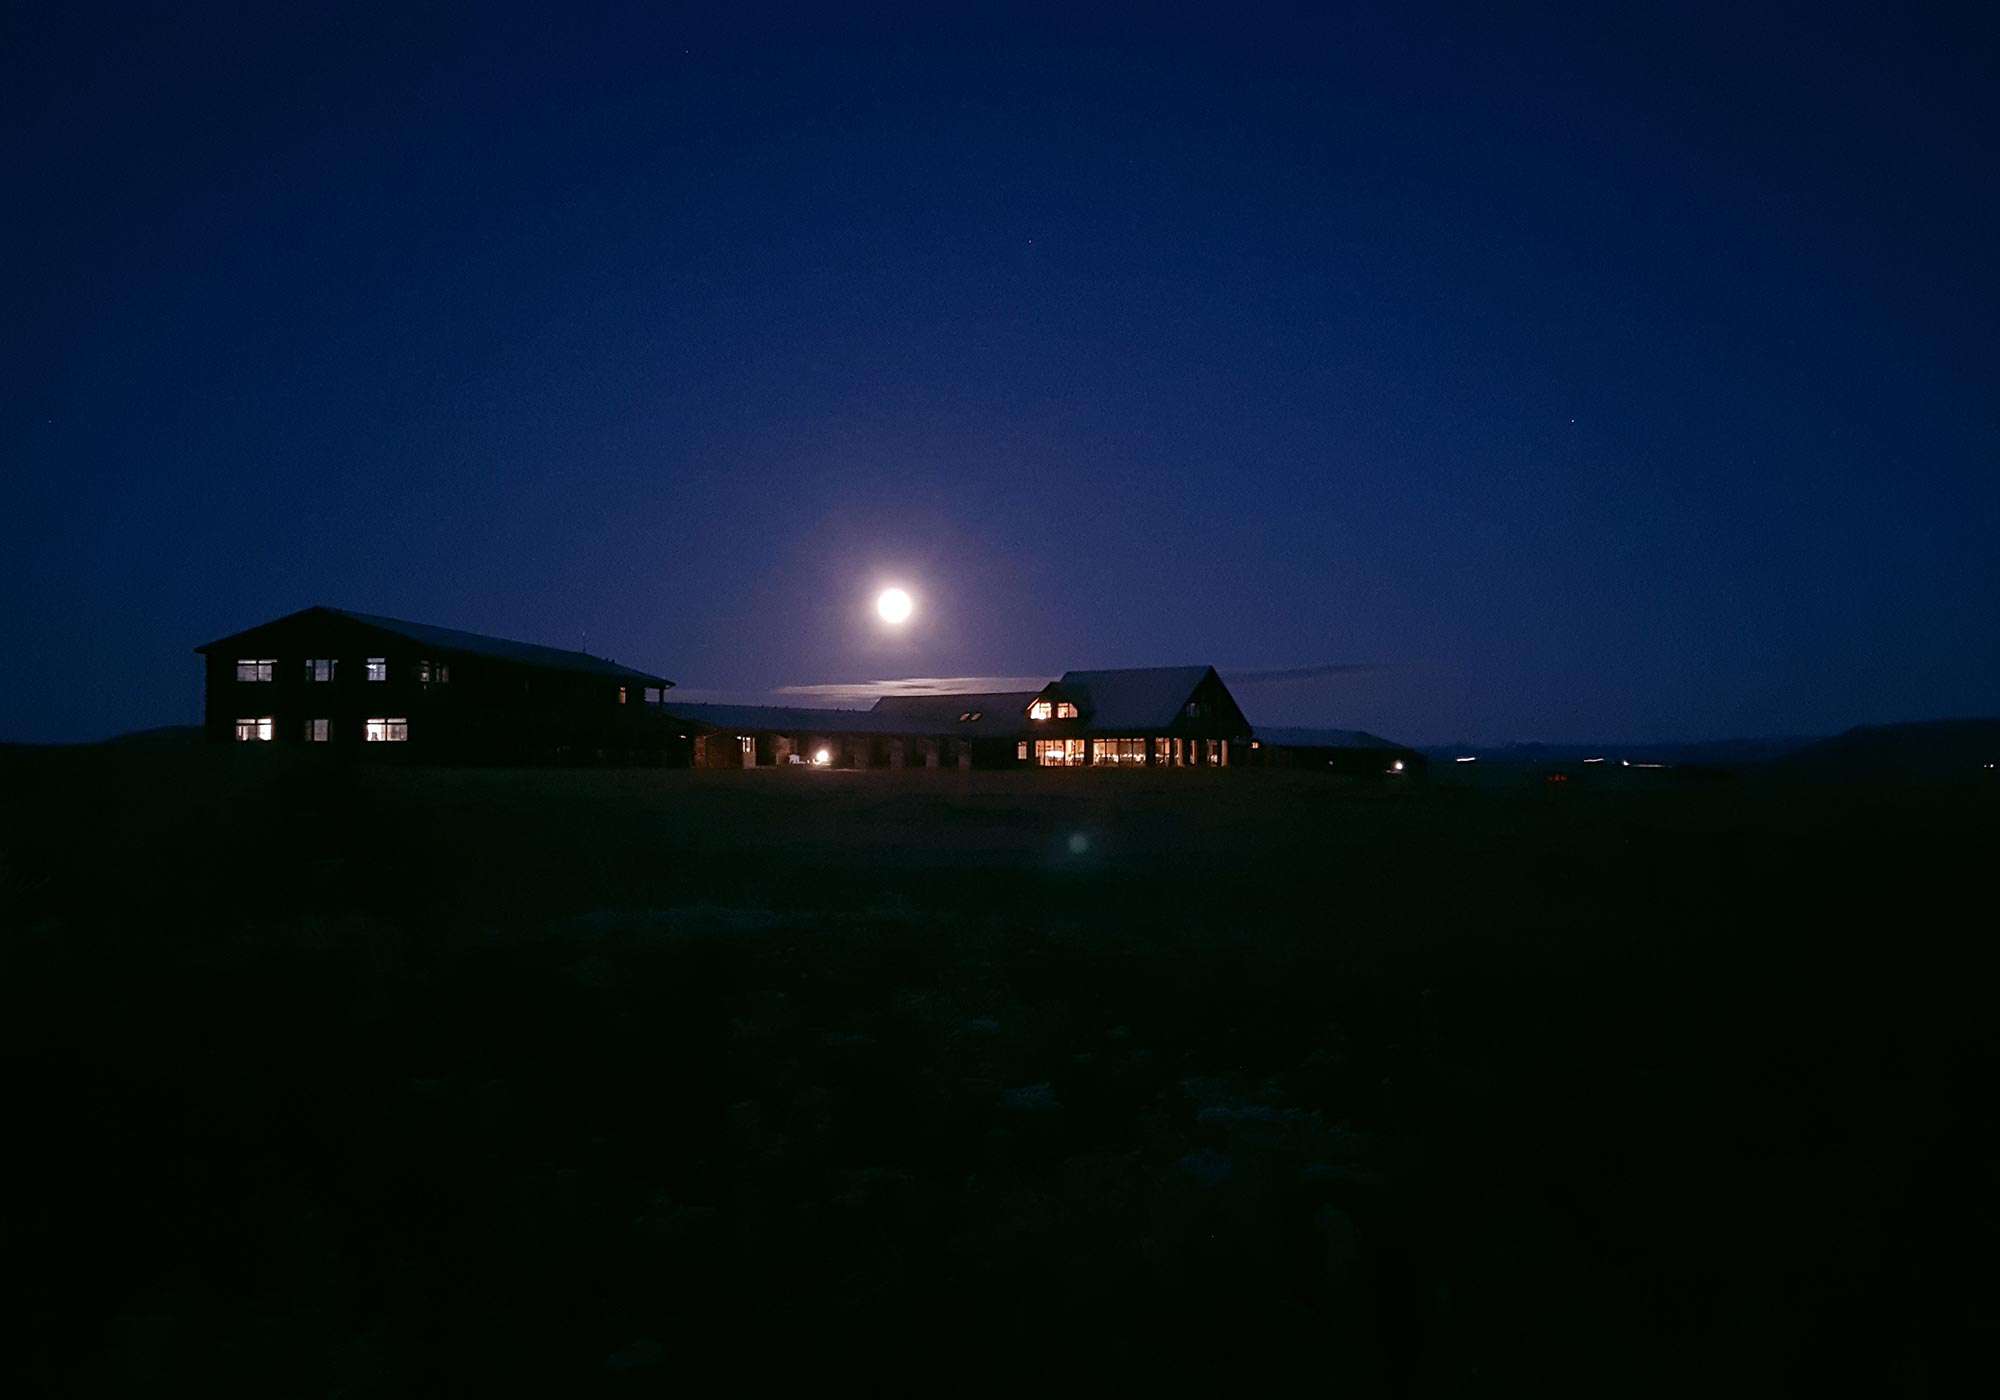 Exterior of Hotel Rangá at nighttime underneath the moon.